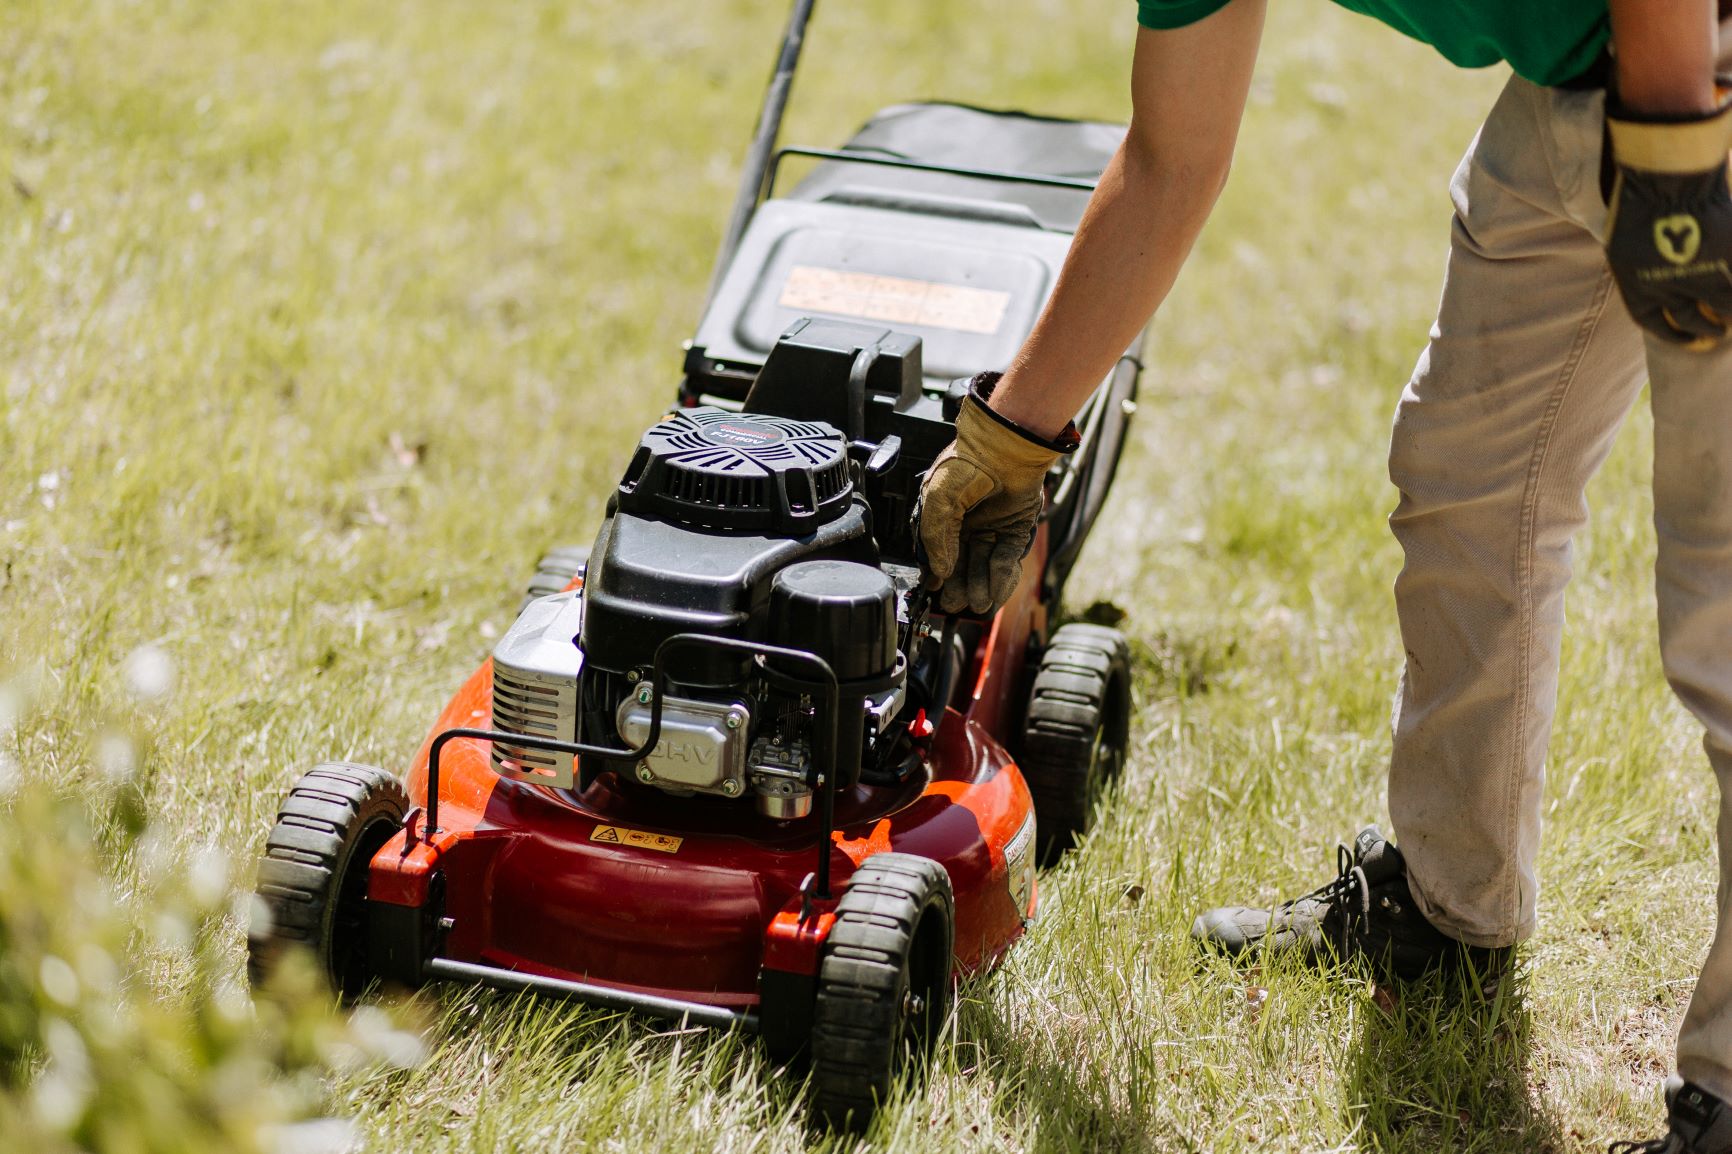 Storing Your Lawn Mower Properly Over Winter